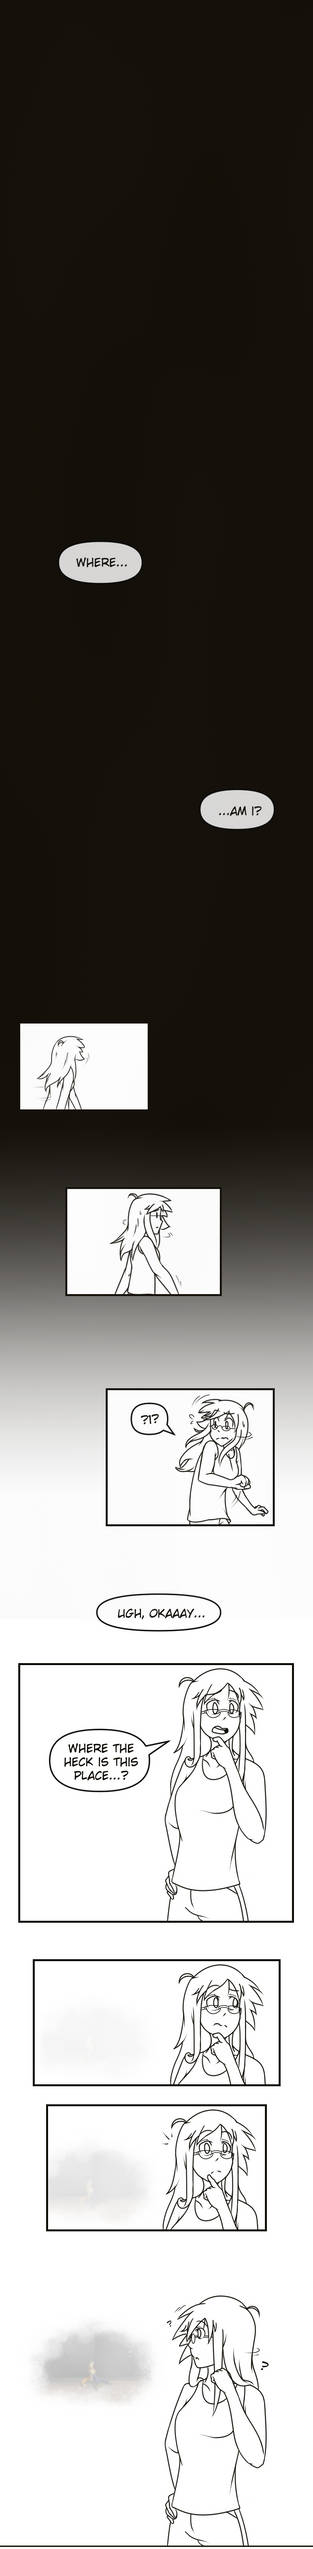 .DRA-E1-1:. Greeting the Day Pg1